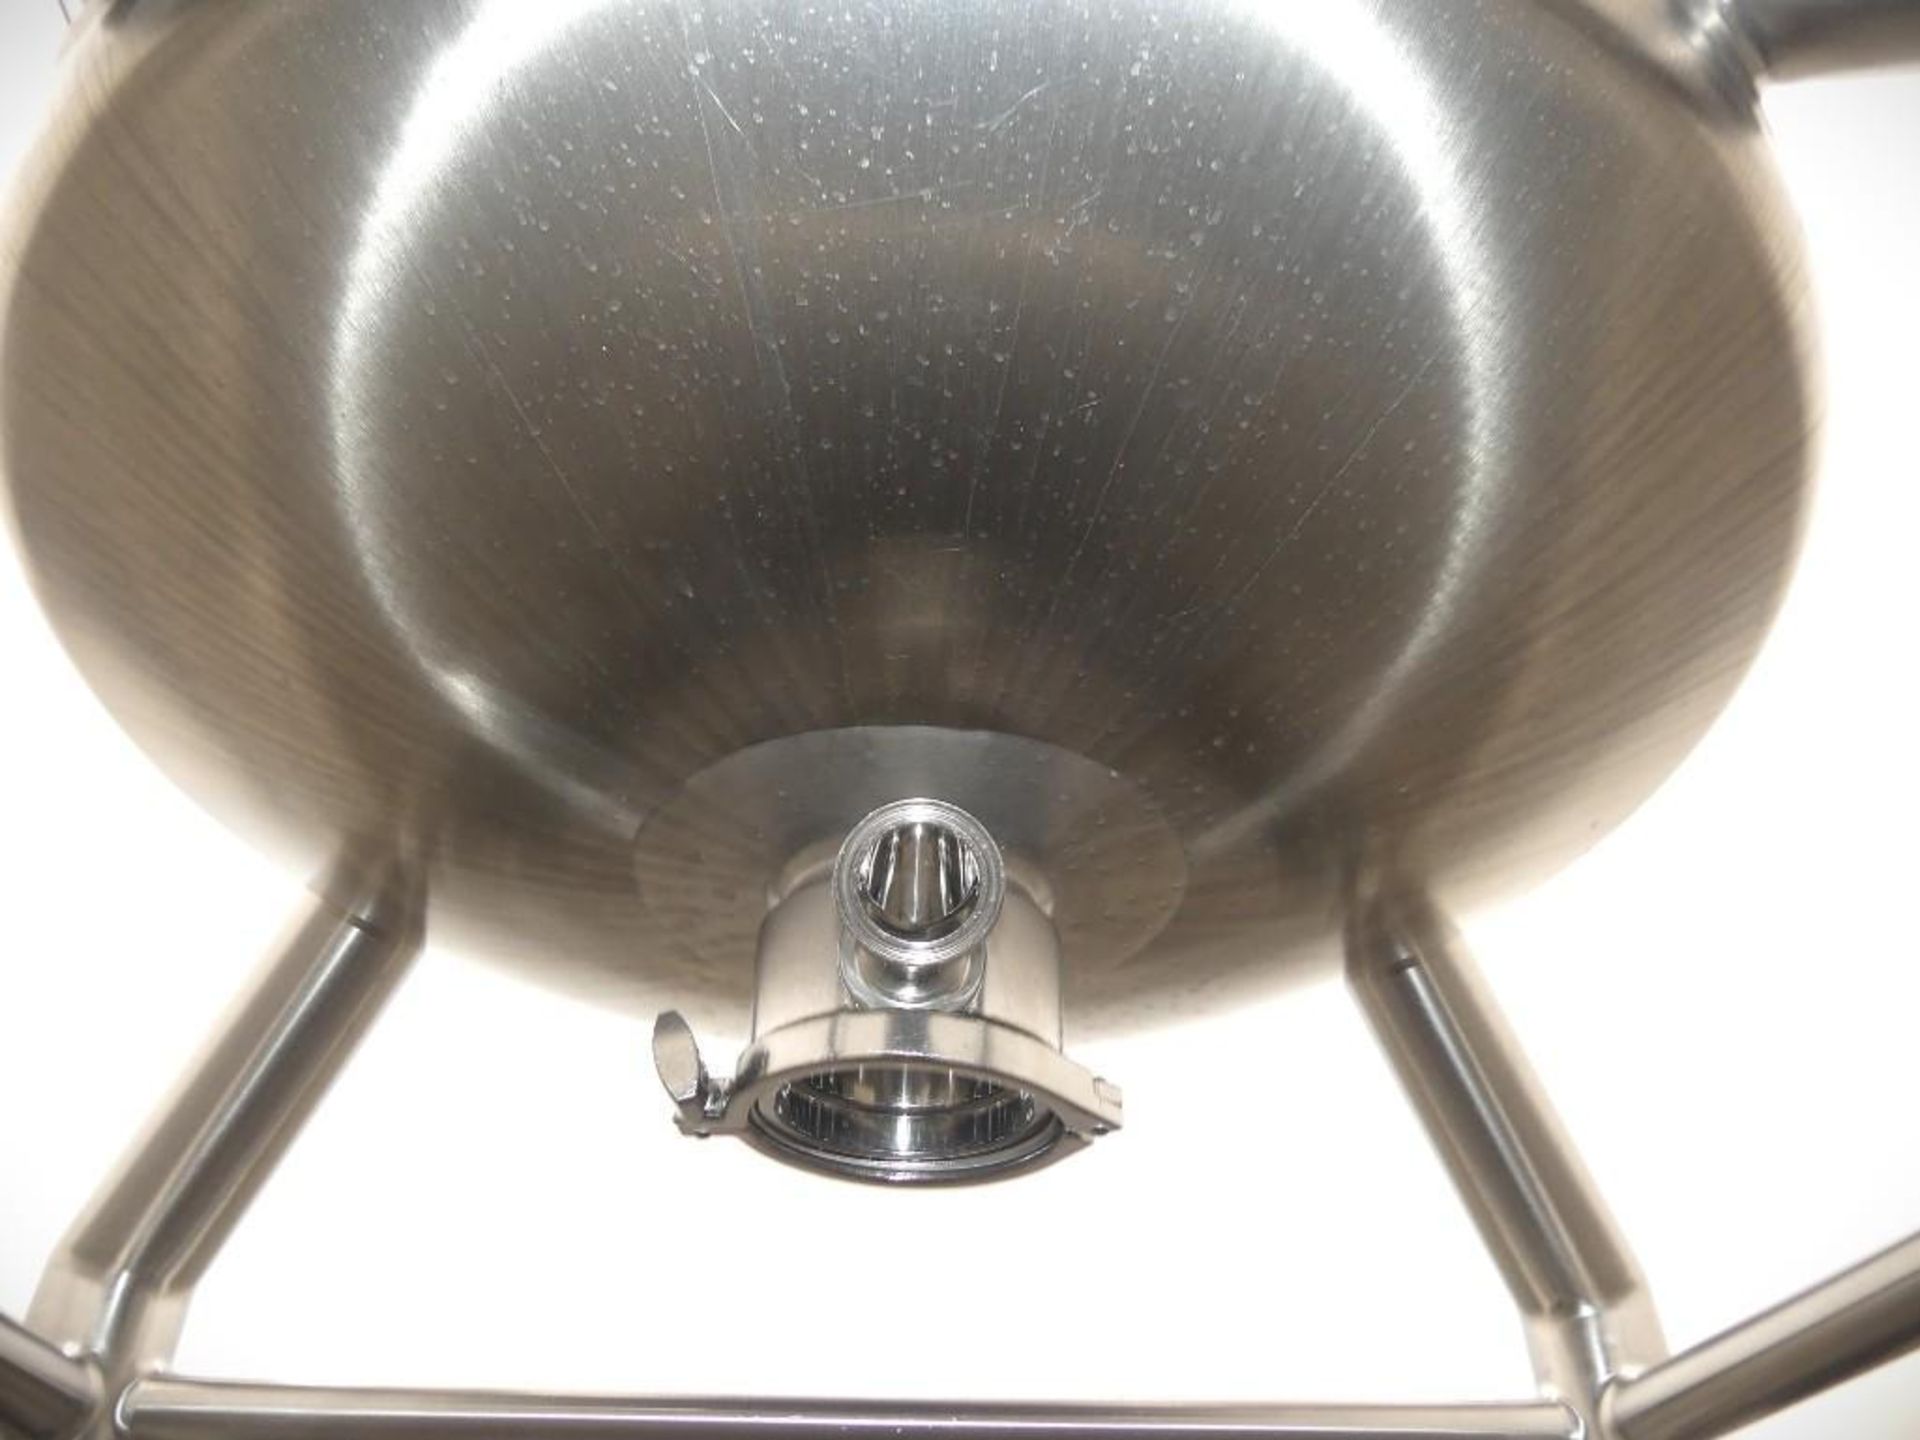 Lee 283 Liter Stainless Steel Agitated Kettle - Image 16 of 21